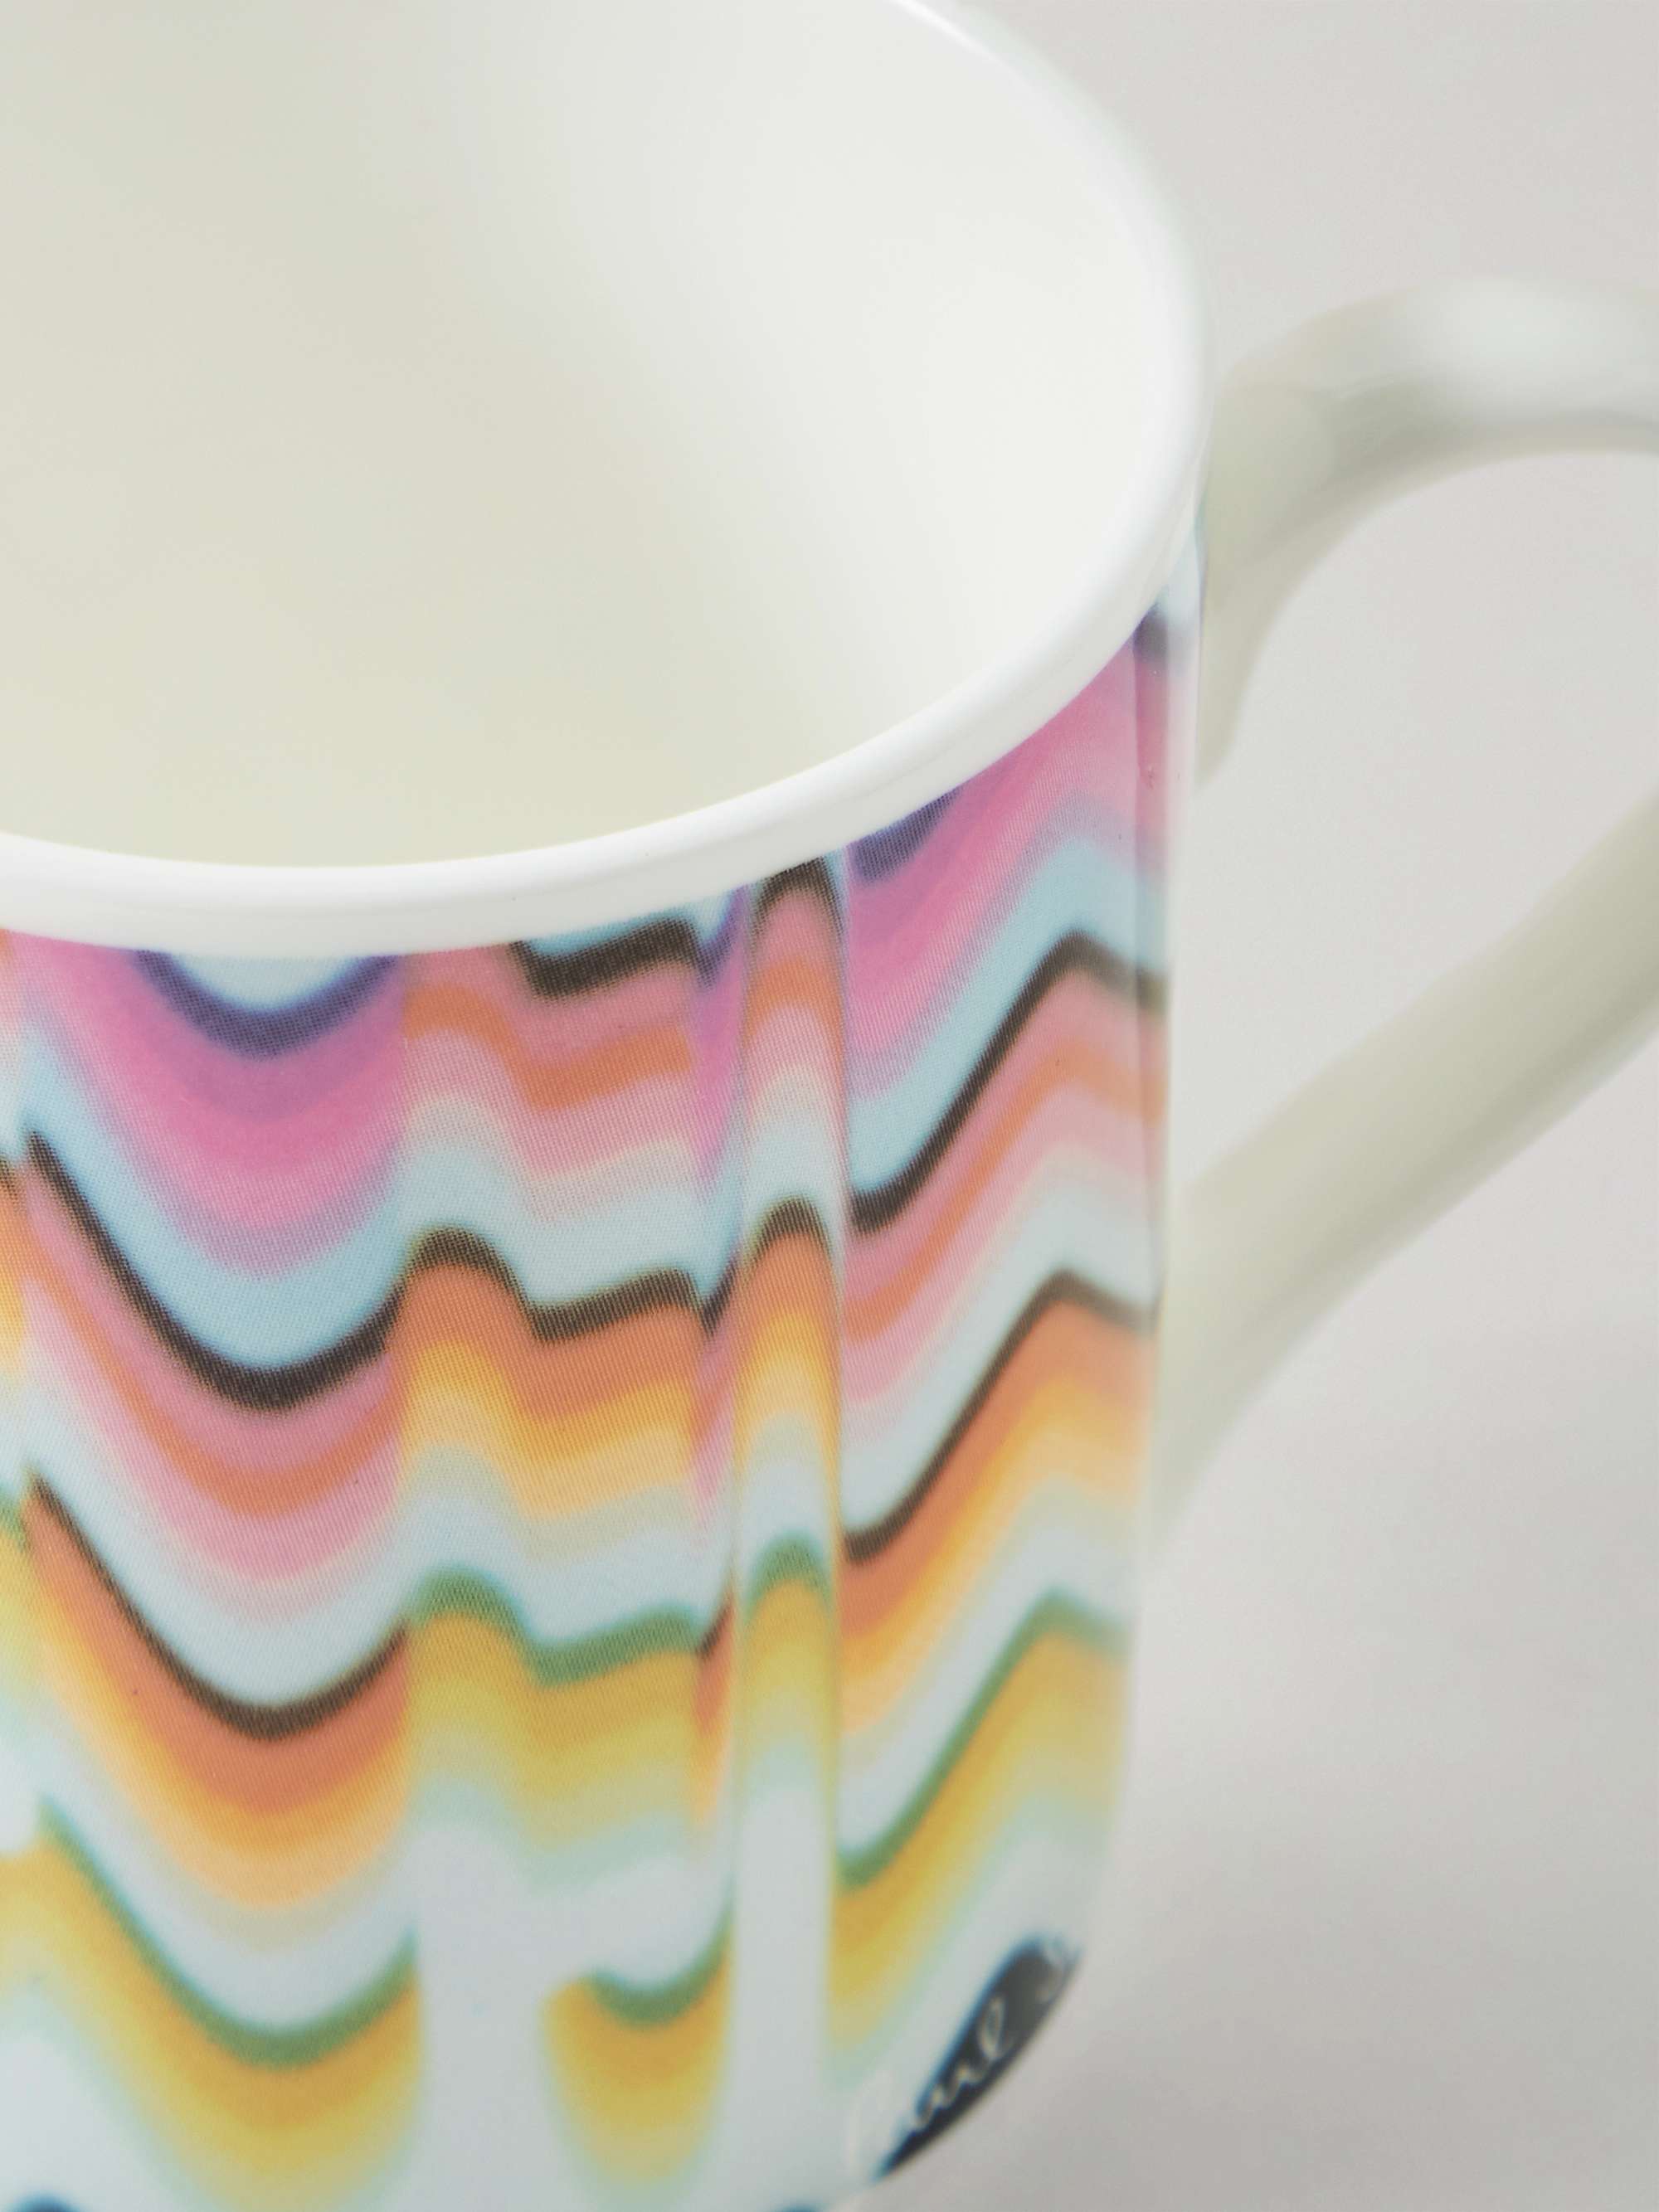 Details about   Paul Smith Mug Cup Colorful Star Print Design Made in Japan New 